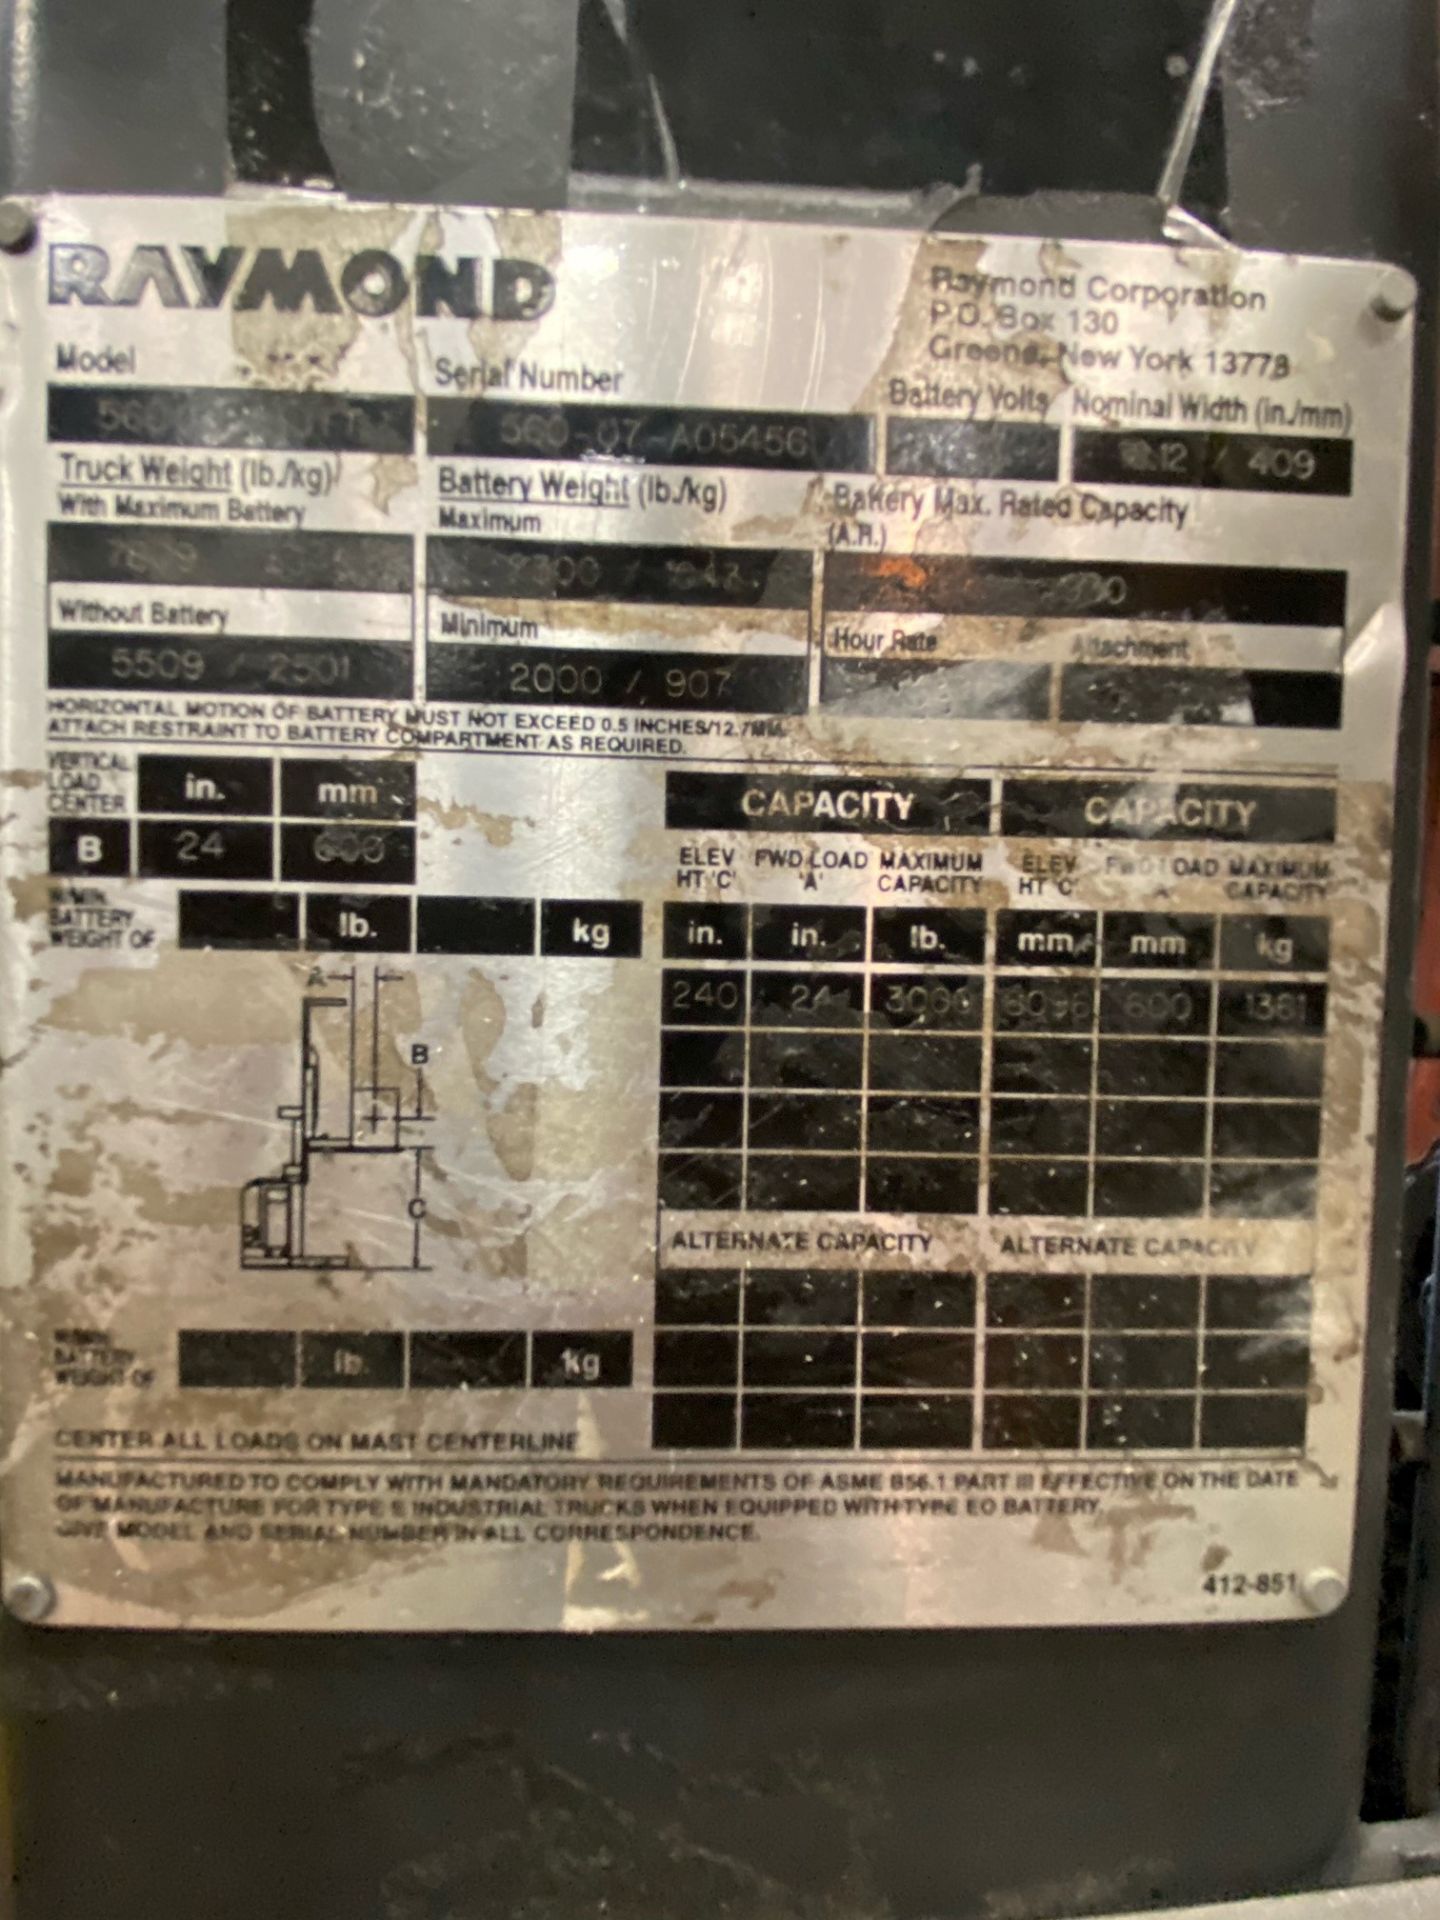 ELECTRIC FORKLIFT, RAYMOND 3000 LB. BASE CAP. MDL. 560-OPC30TT, new 2007, 36 v. electric w/charger, - Image 3 of 10